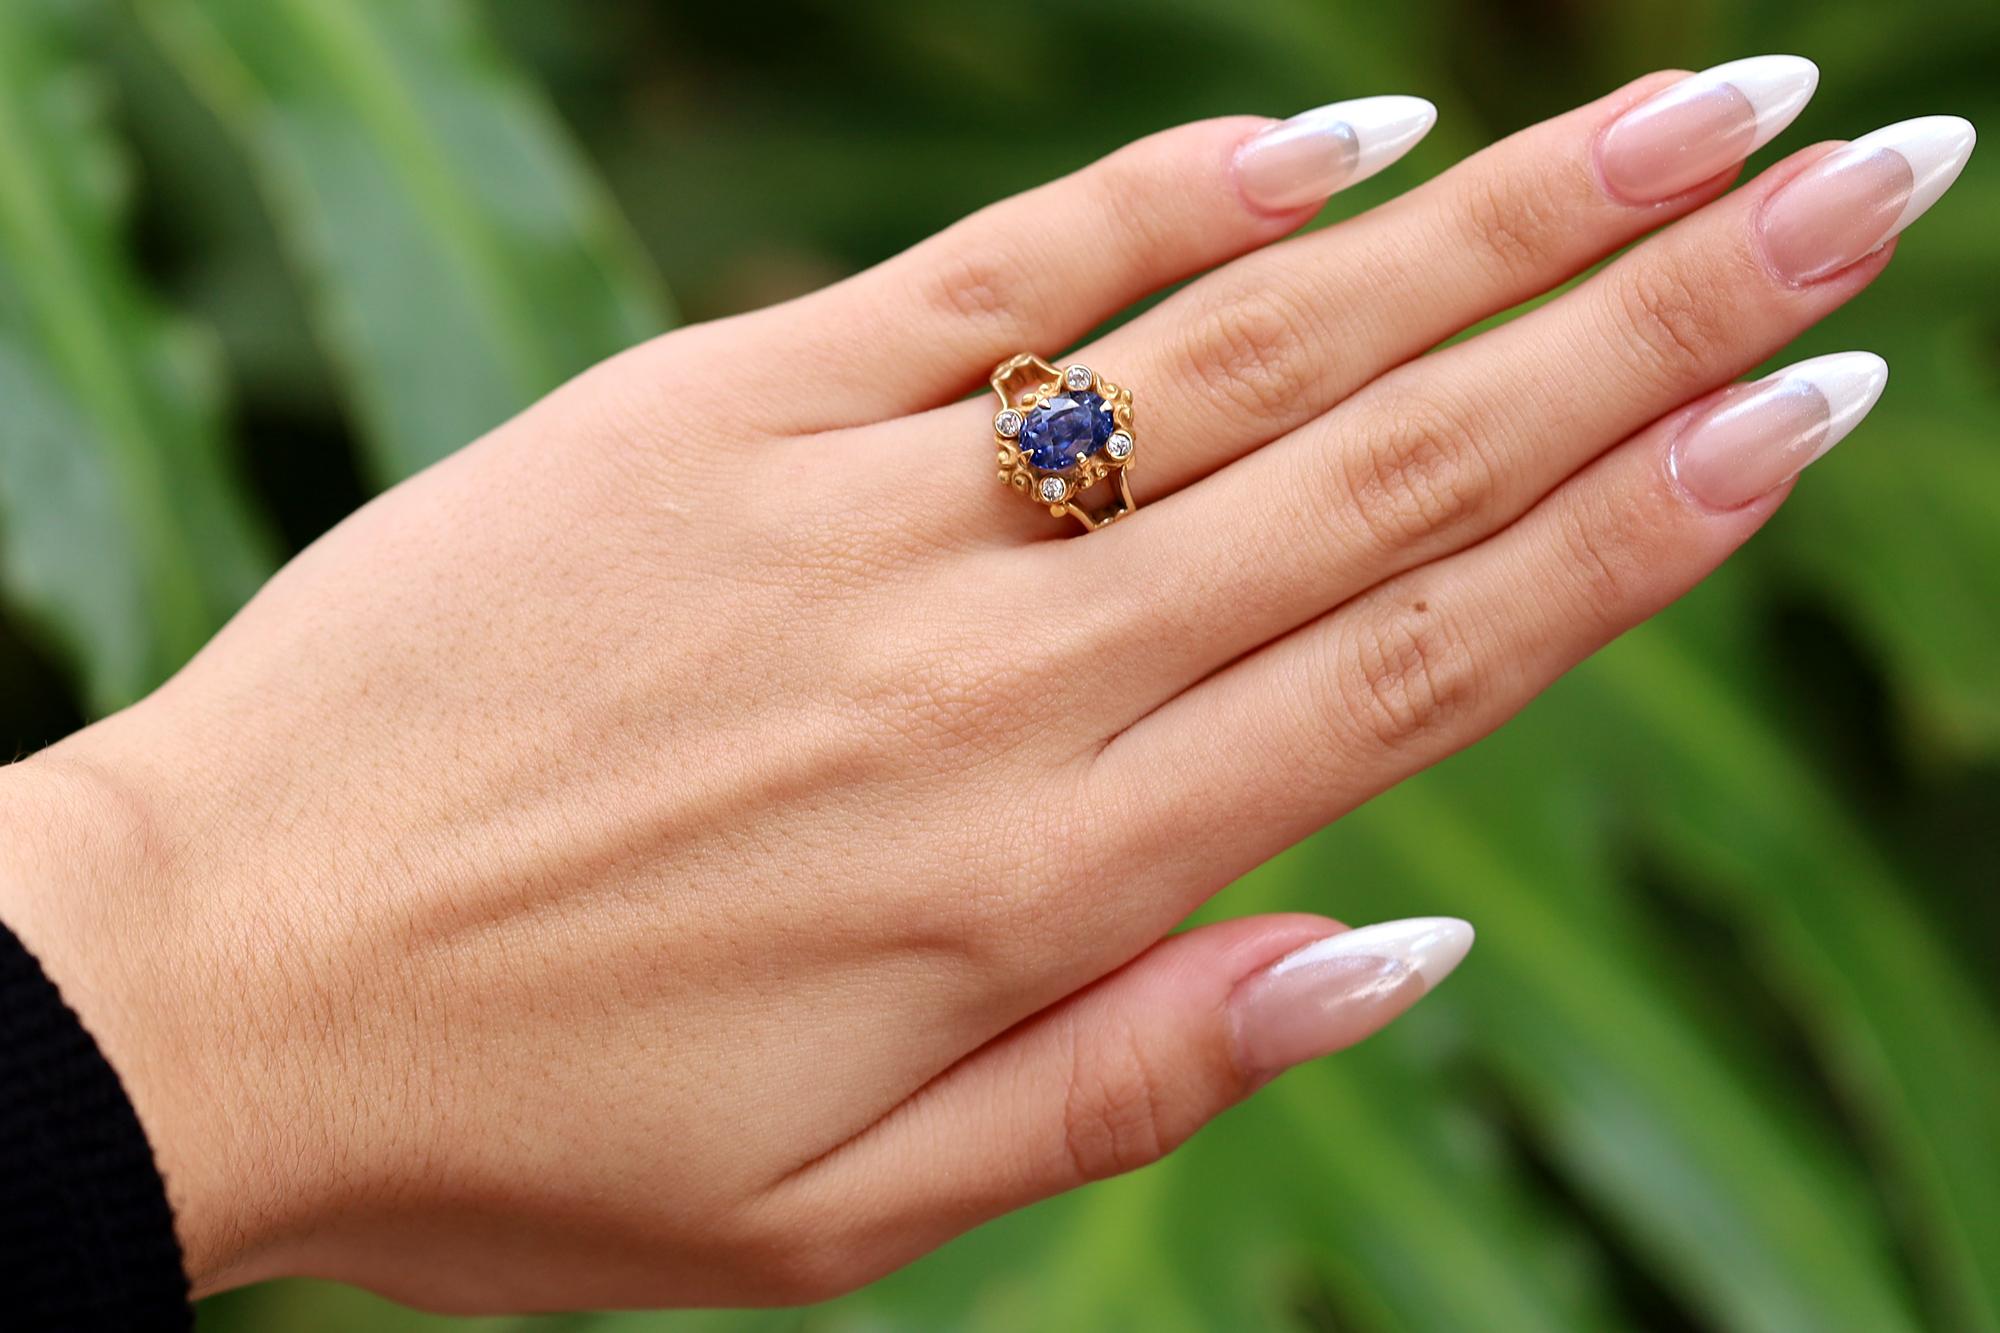 This vivacious Victorian gemstone engagement ring centers on a velvety and vibrant blue sapphire. The well-proportioned oval weighing 2.28 carats is held within a scrolling filigree mounting adorned with 4 sparkling diamonds. For a non-traditional